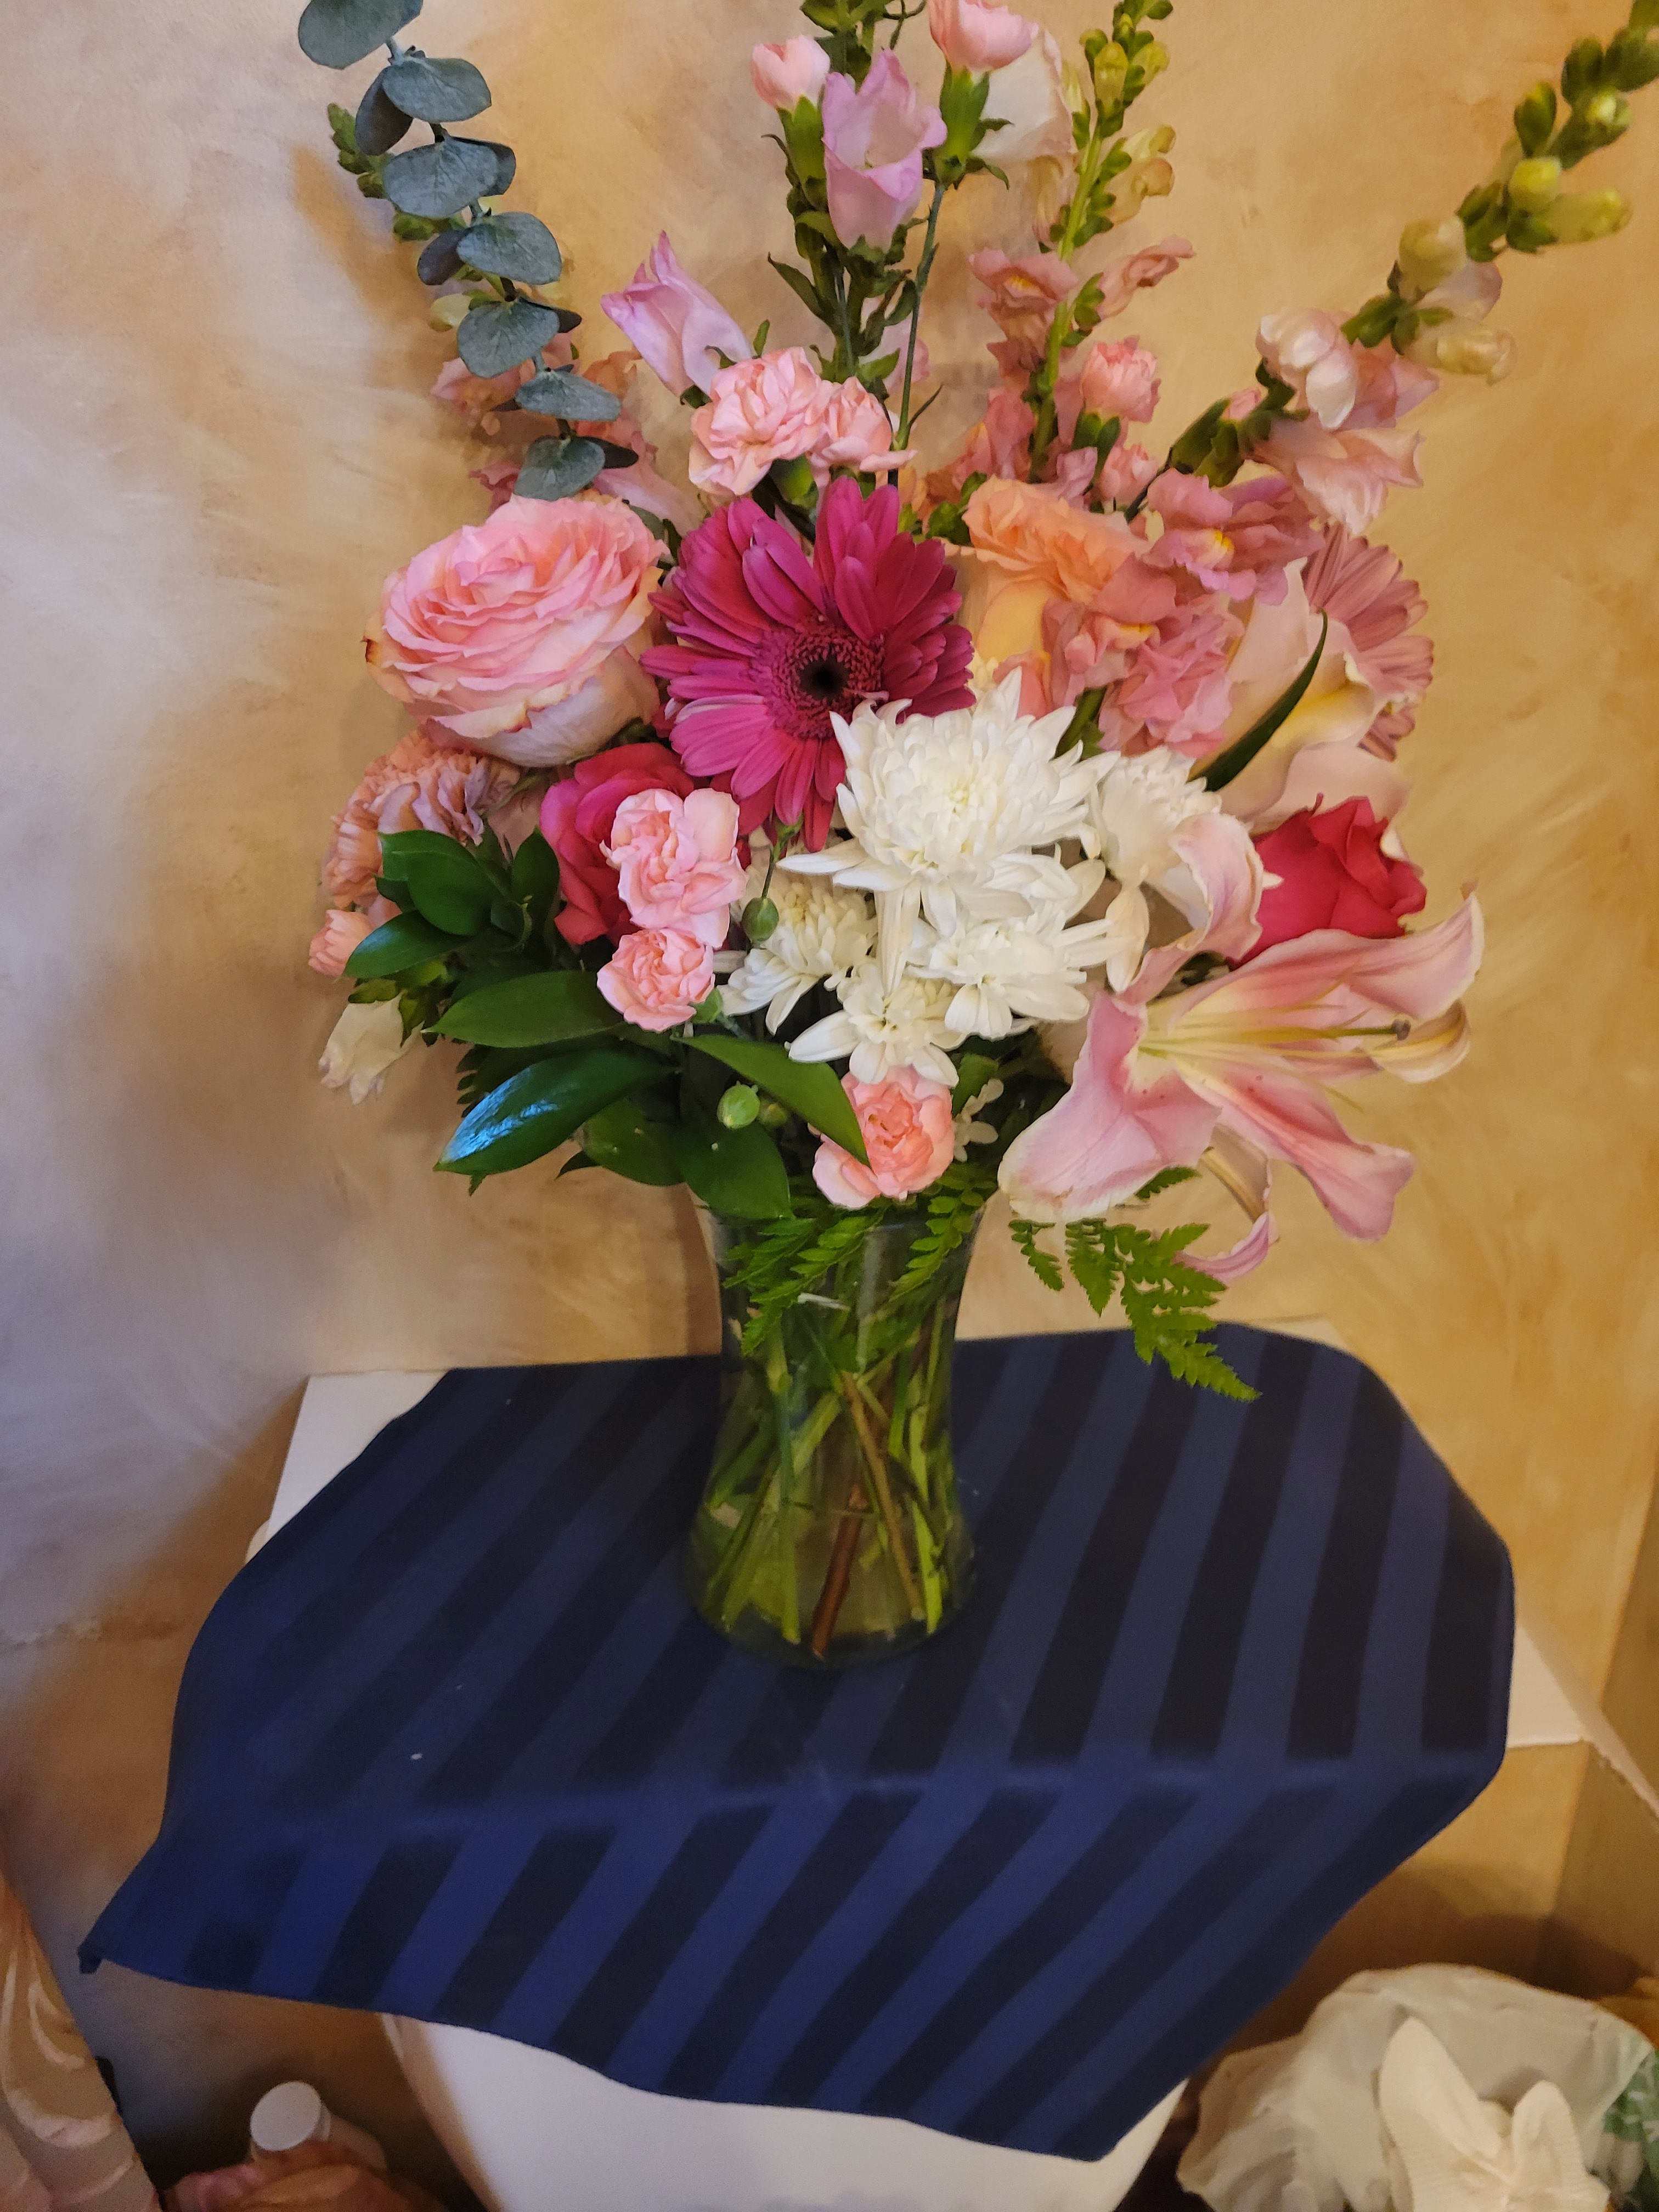 Colorful Mom - Give mom a delightful bouquet with lilies, Gerber daisies, and roses